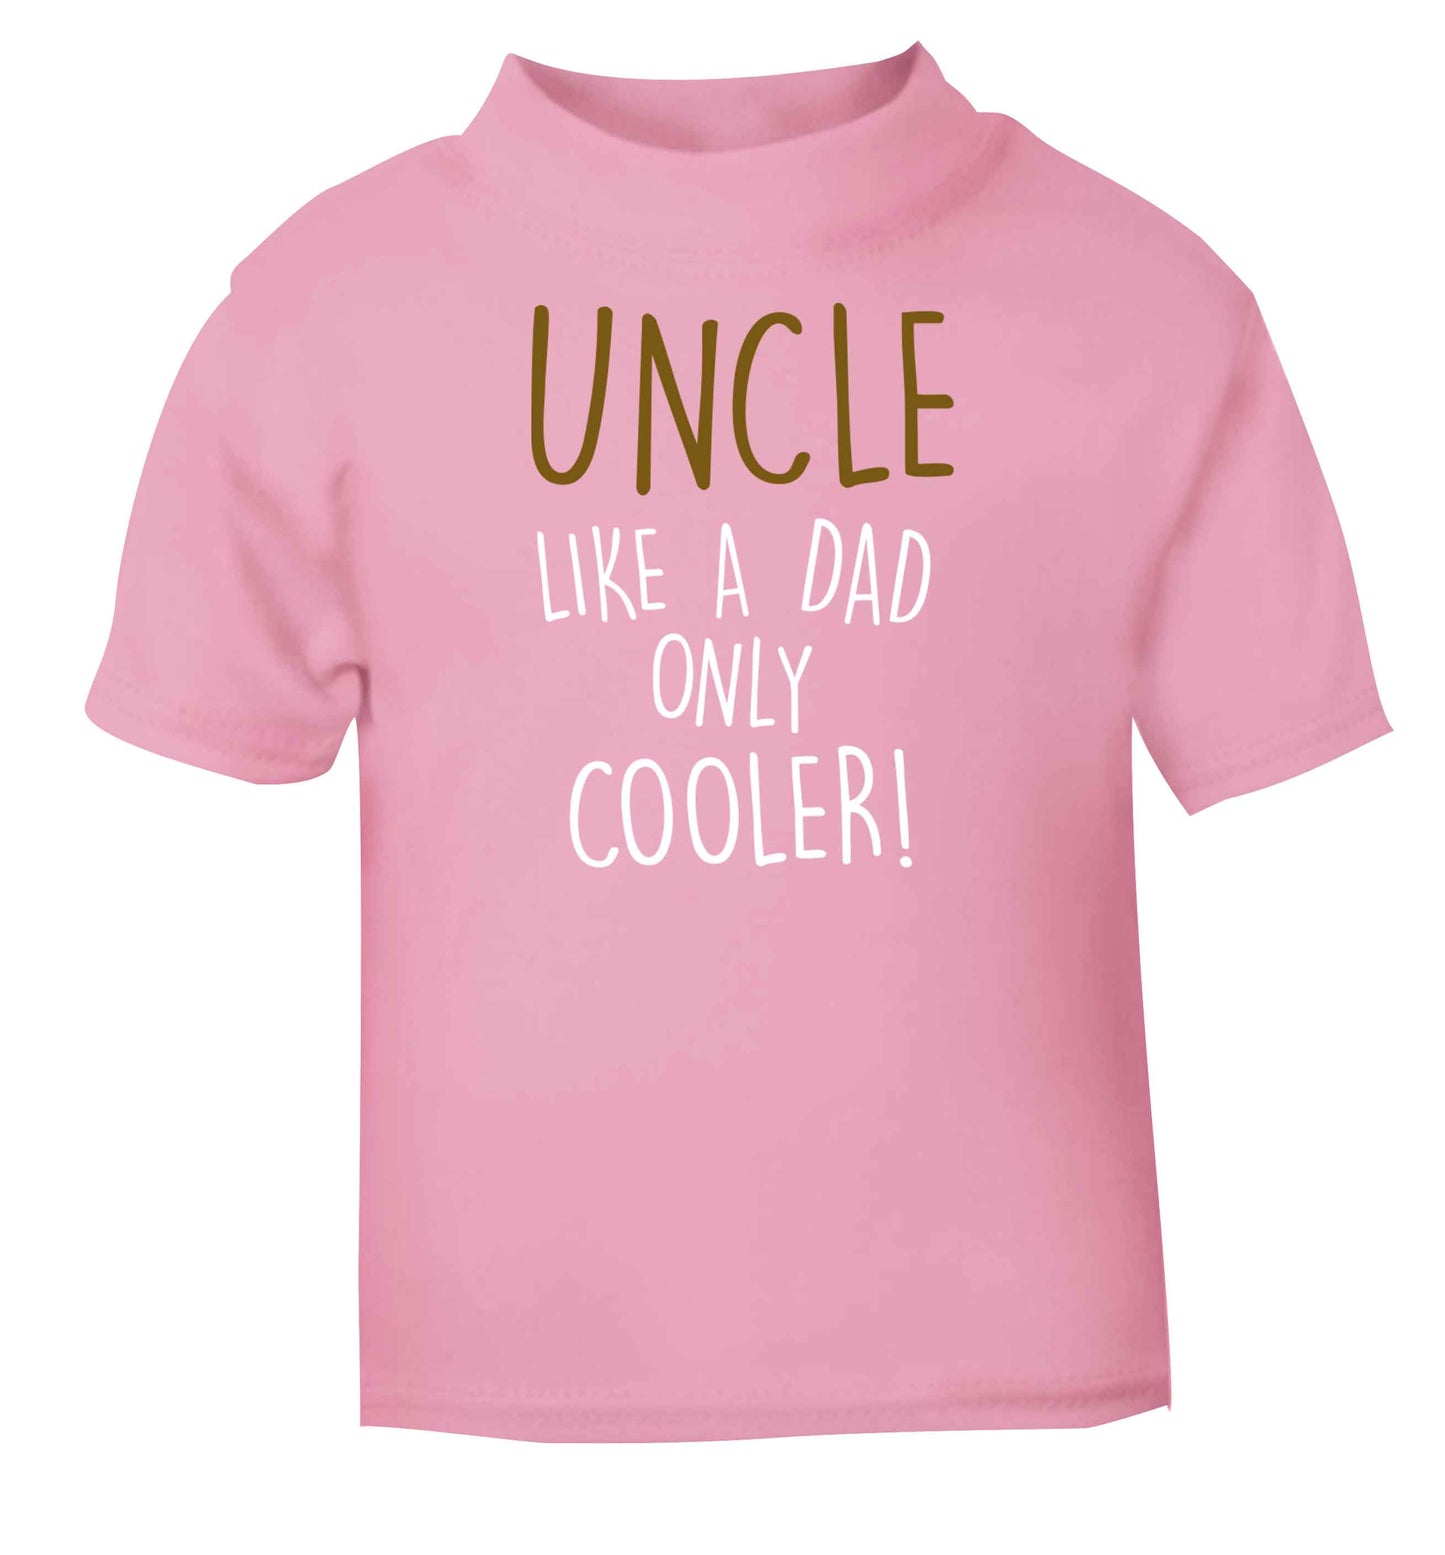 Uncle like a dad only cooler light pink baby toddler Tshirt 2 Years